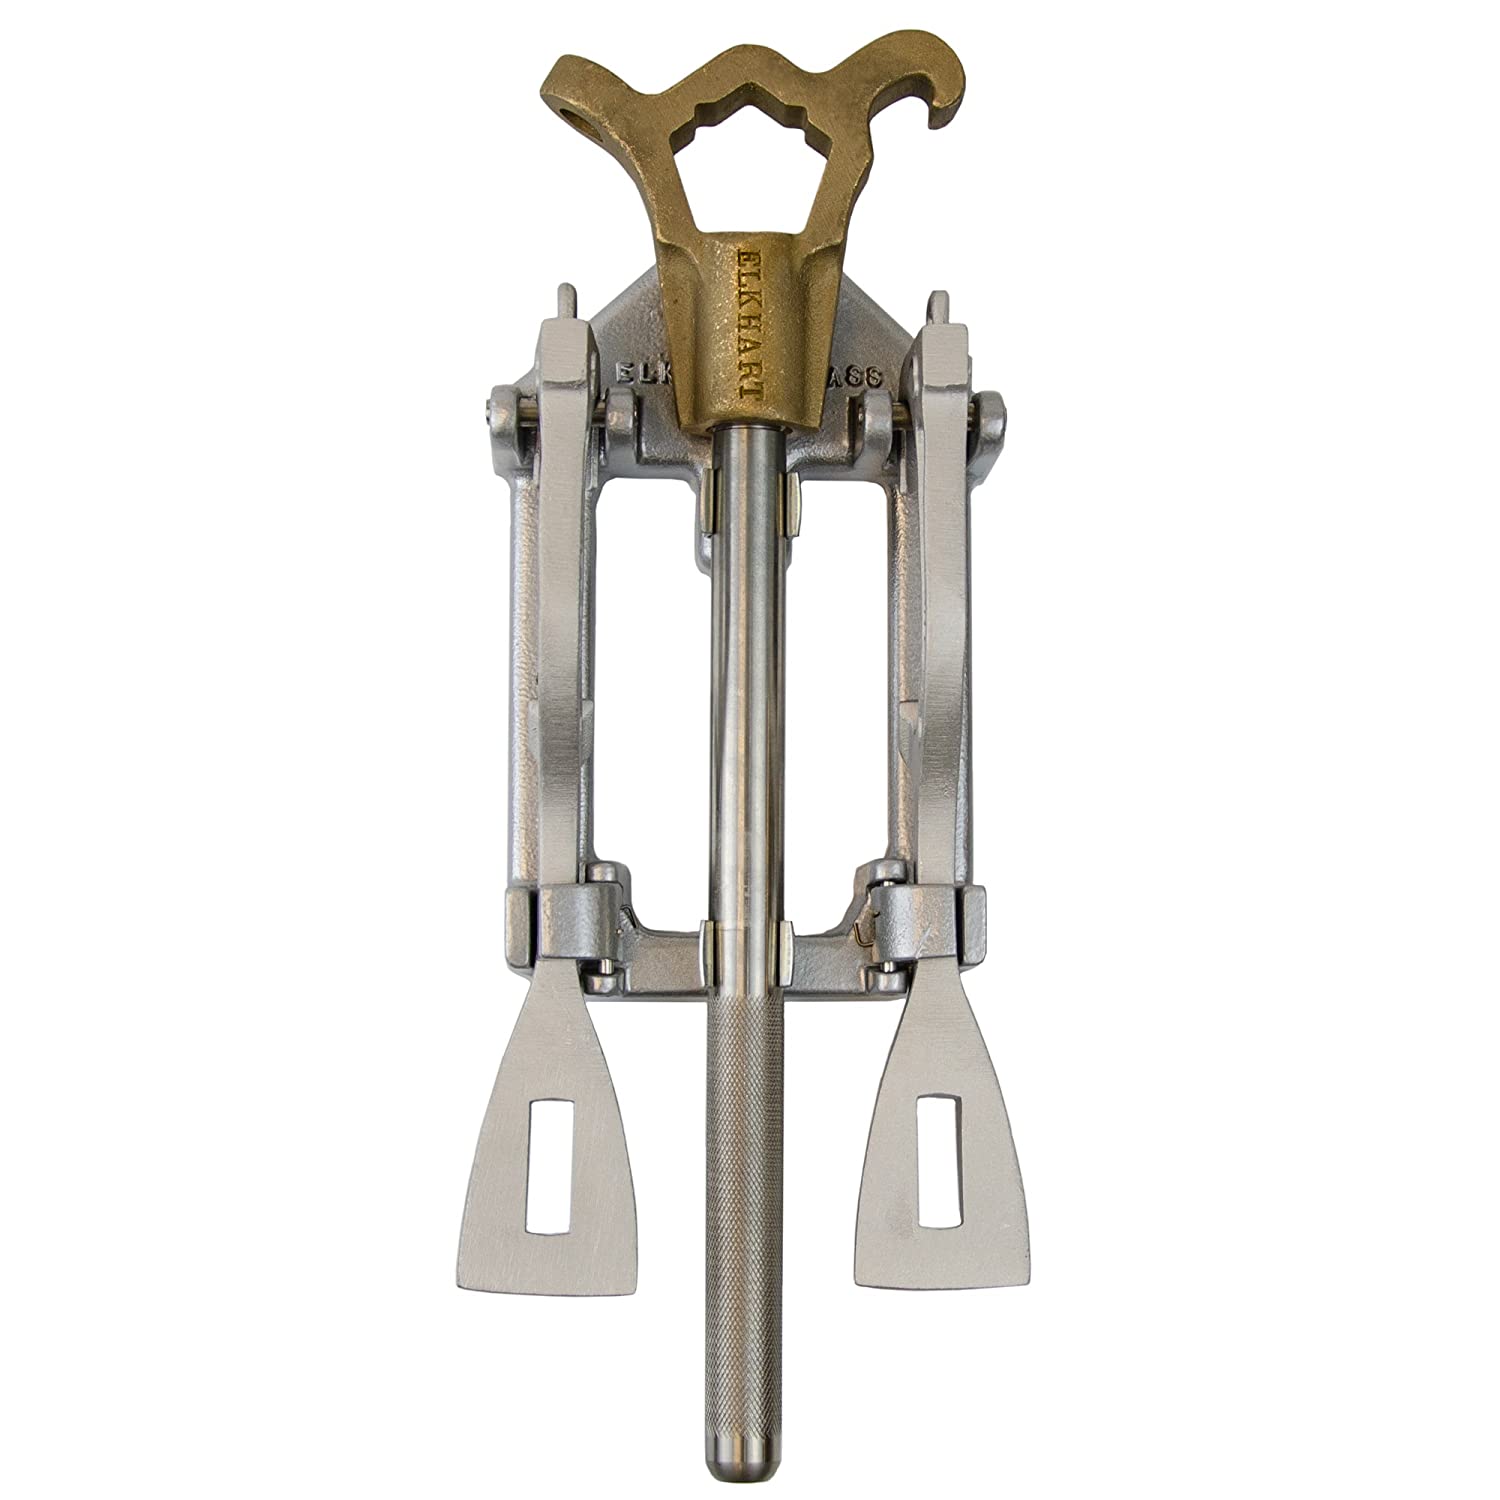 Elkhart Brass: Model 470 Kit with Adjustable Hydrant Wrench, Spanner Wrenches, and Bracket